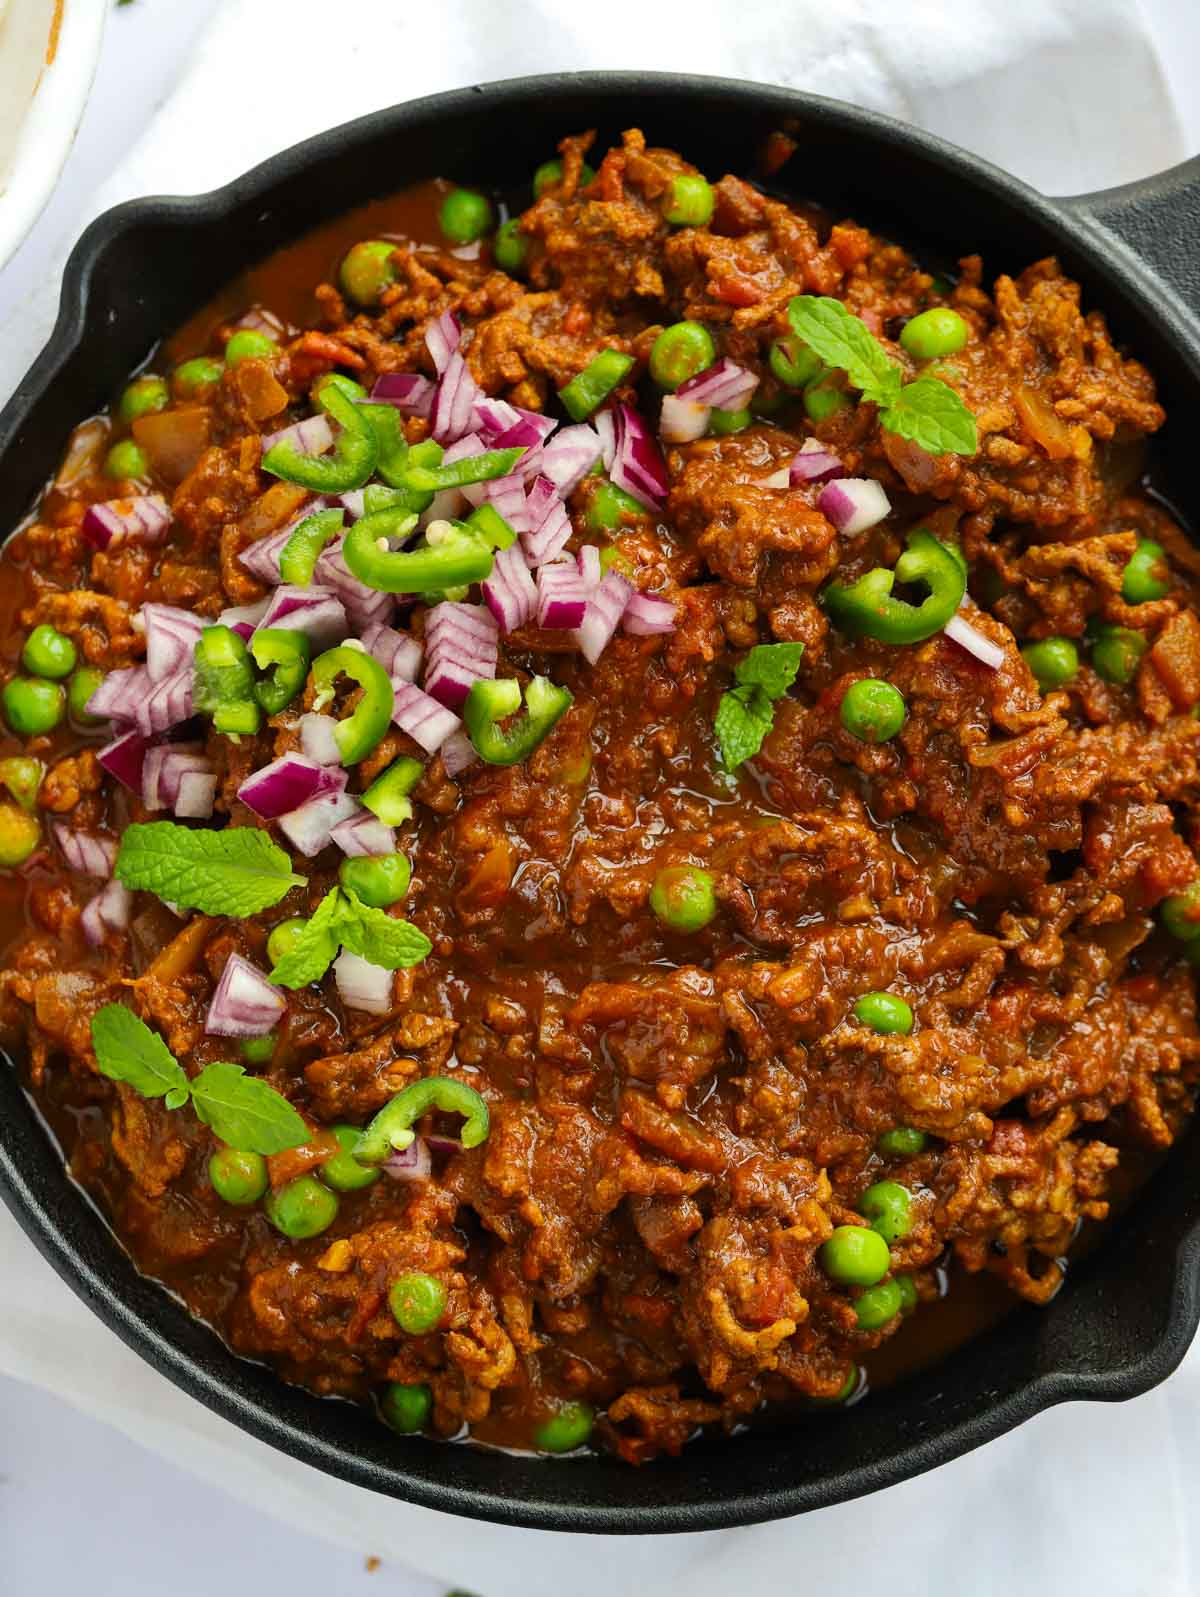 Beef keema curry recipe with peas and green chillis.